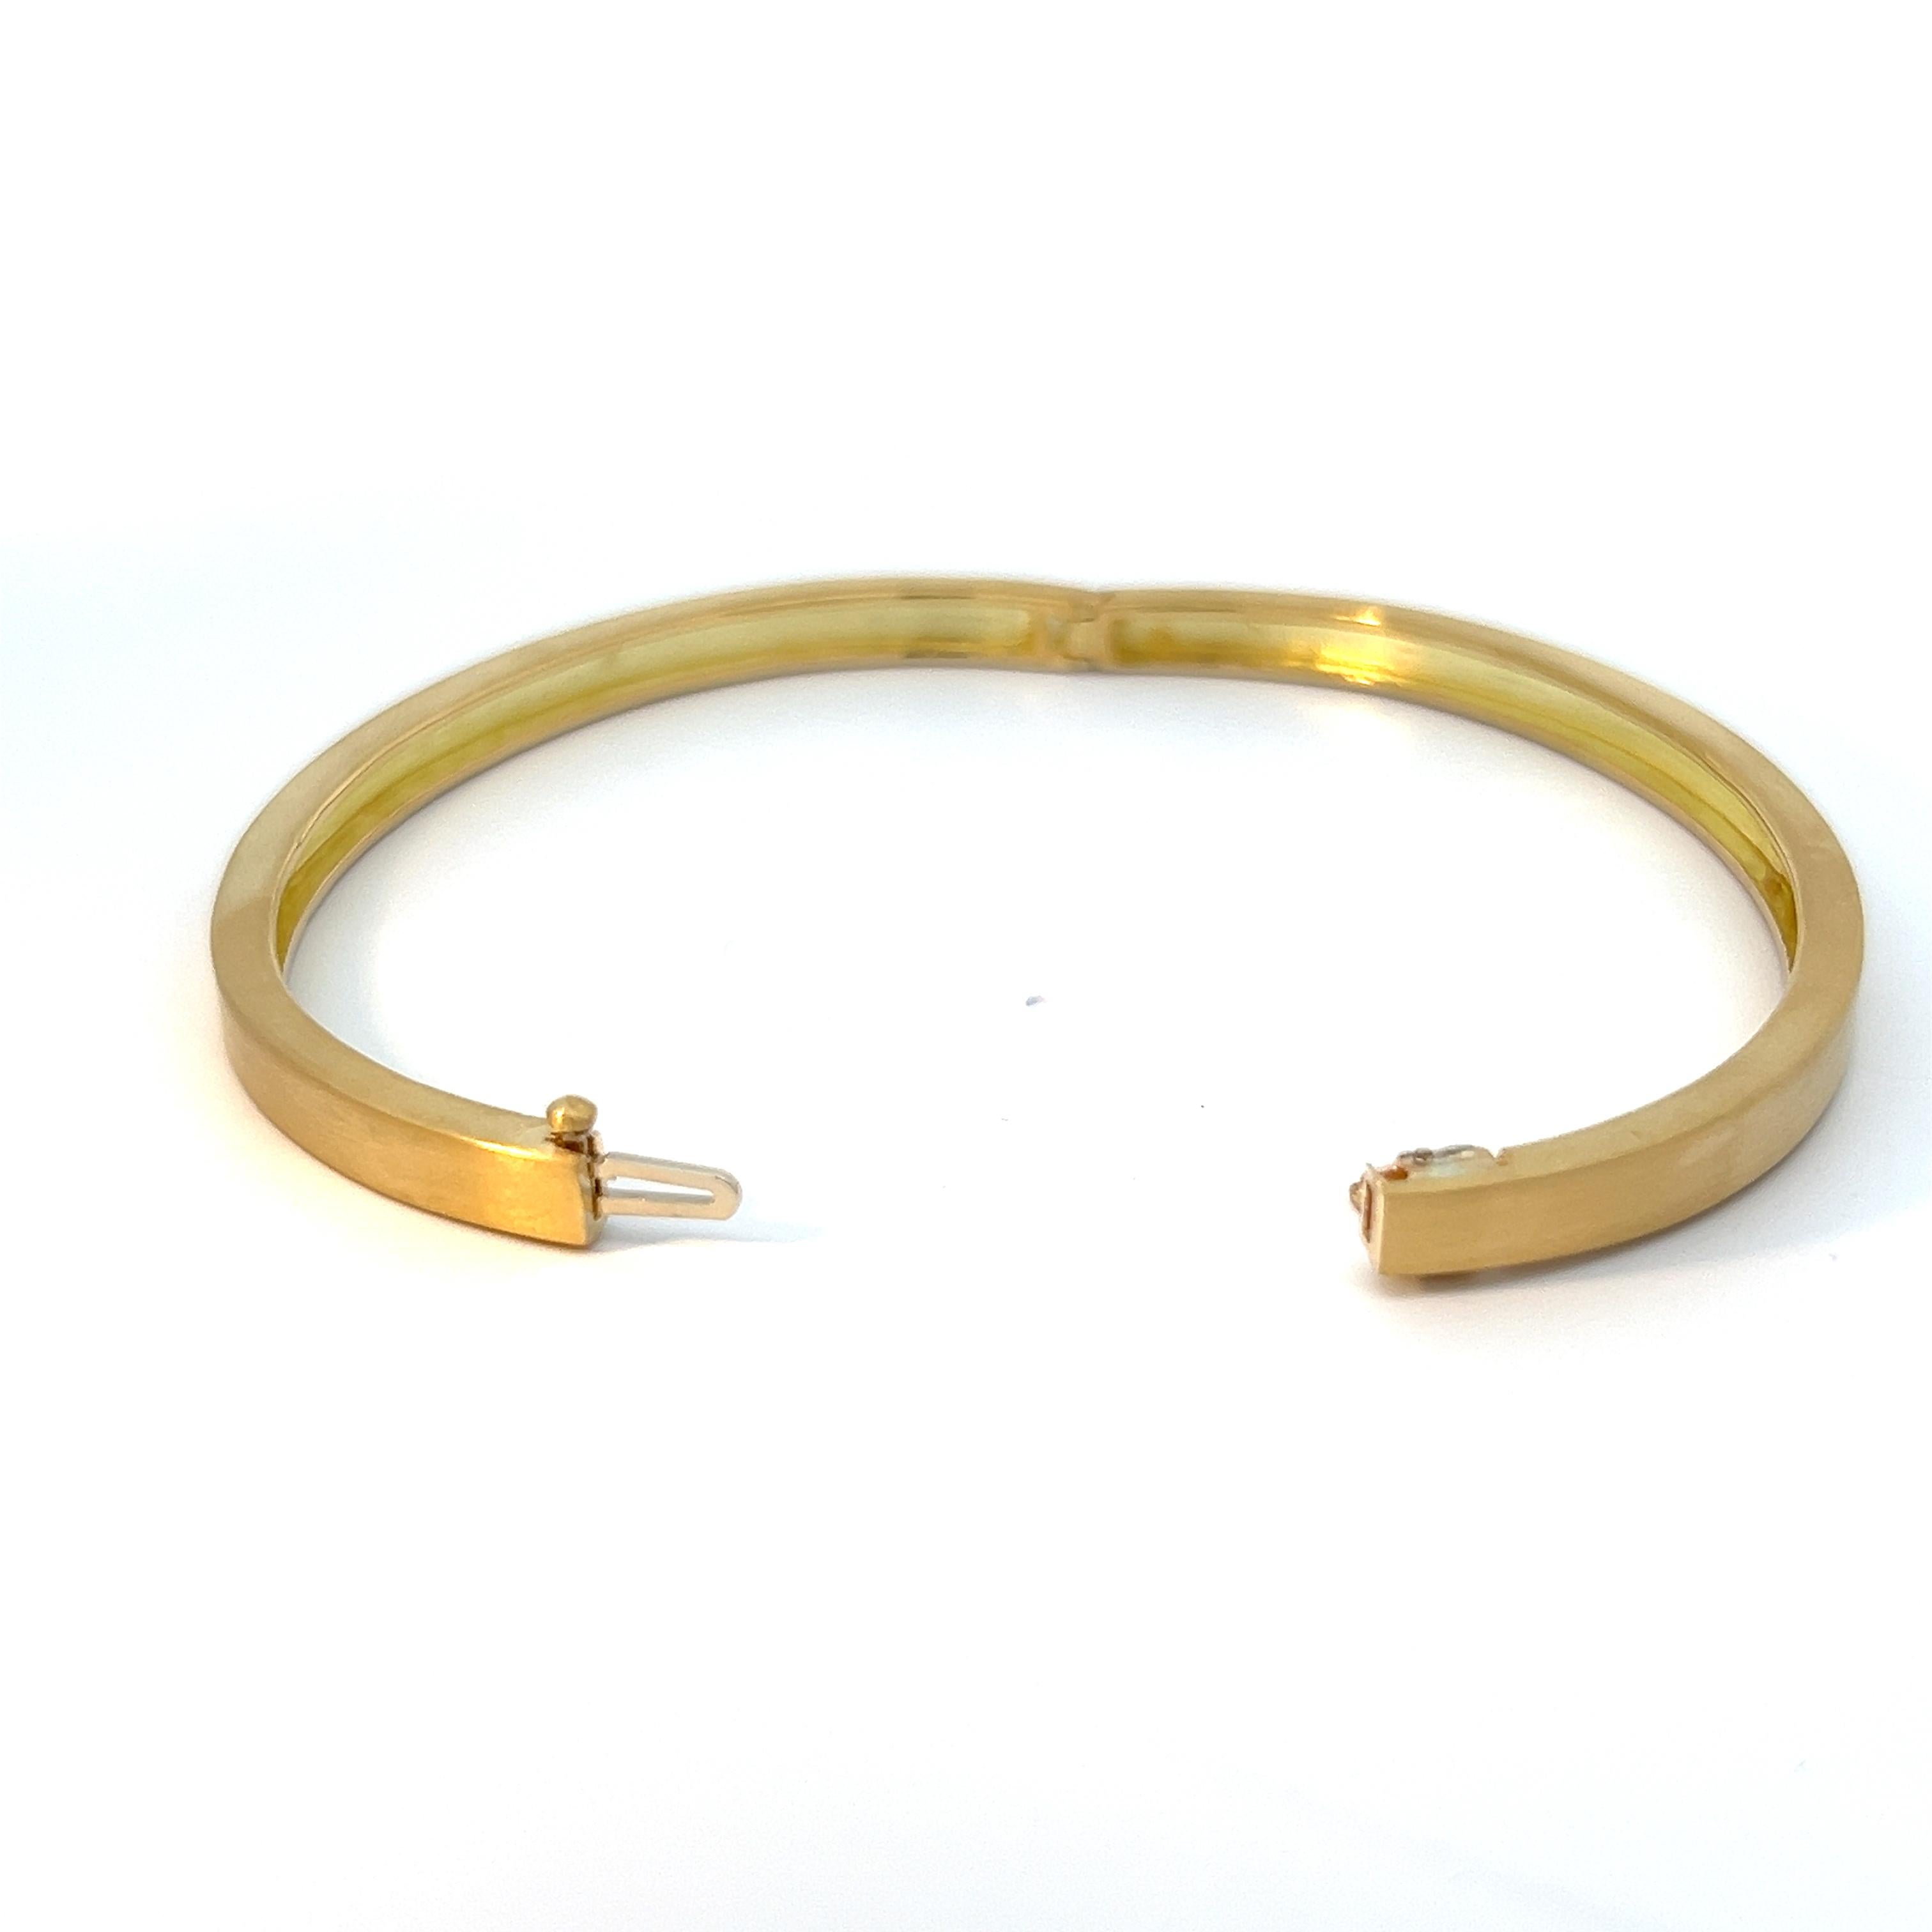 Indulge in understated luxury with this distinguished men's bangle bracelet, meticulously crafted in gleaming 18k yellow gold. The brushed finish lends a subtle yet sophisticated texture to the surface, adding depth and character to this timeless